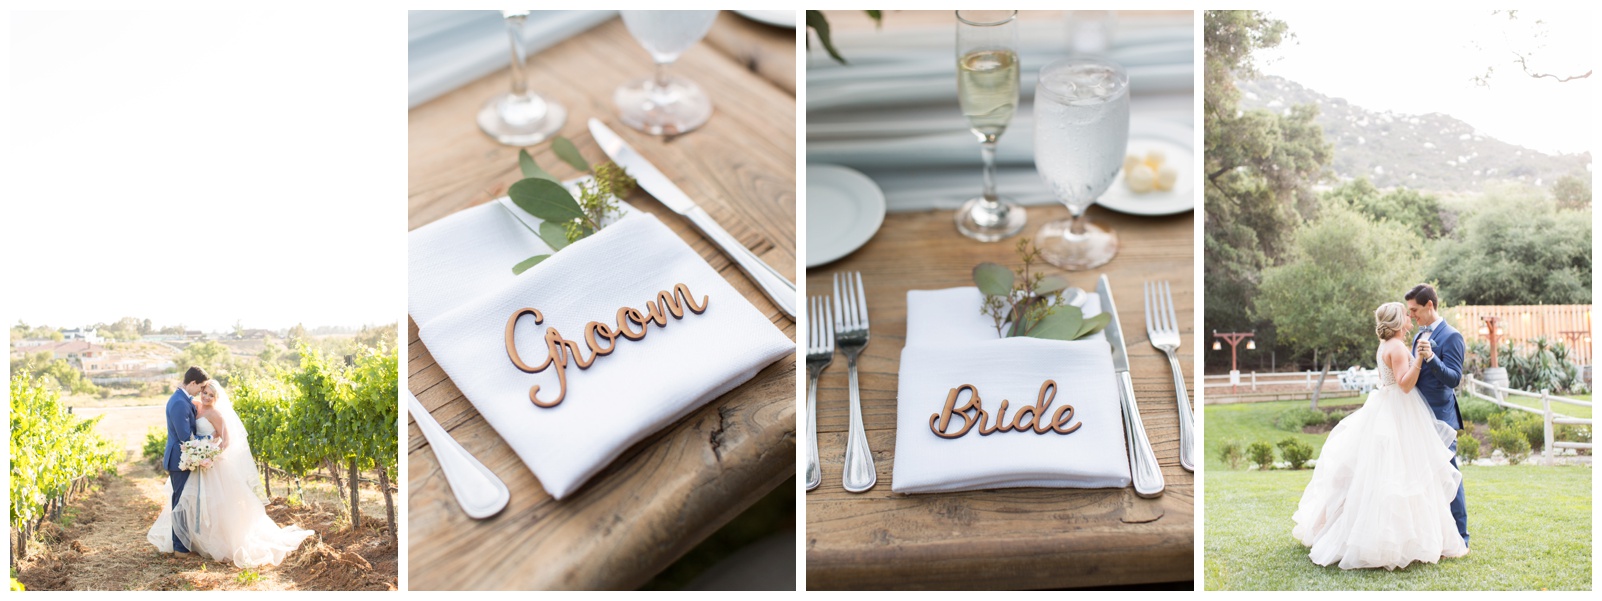 Table top decor ideas for bride and groom 